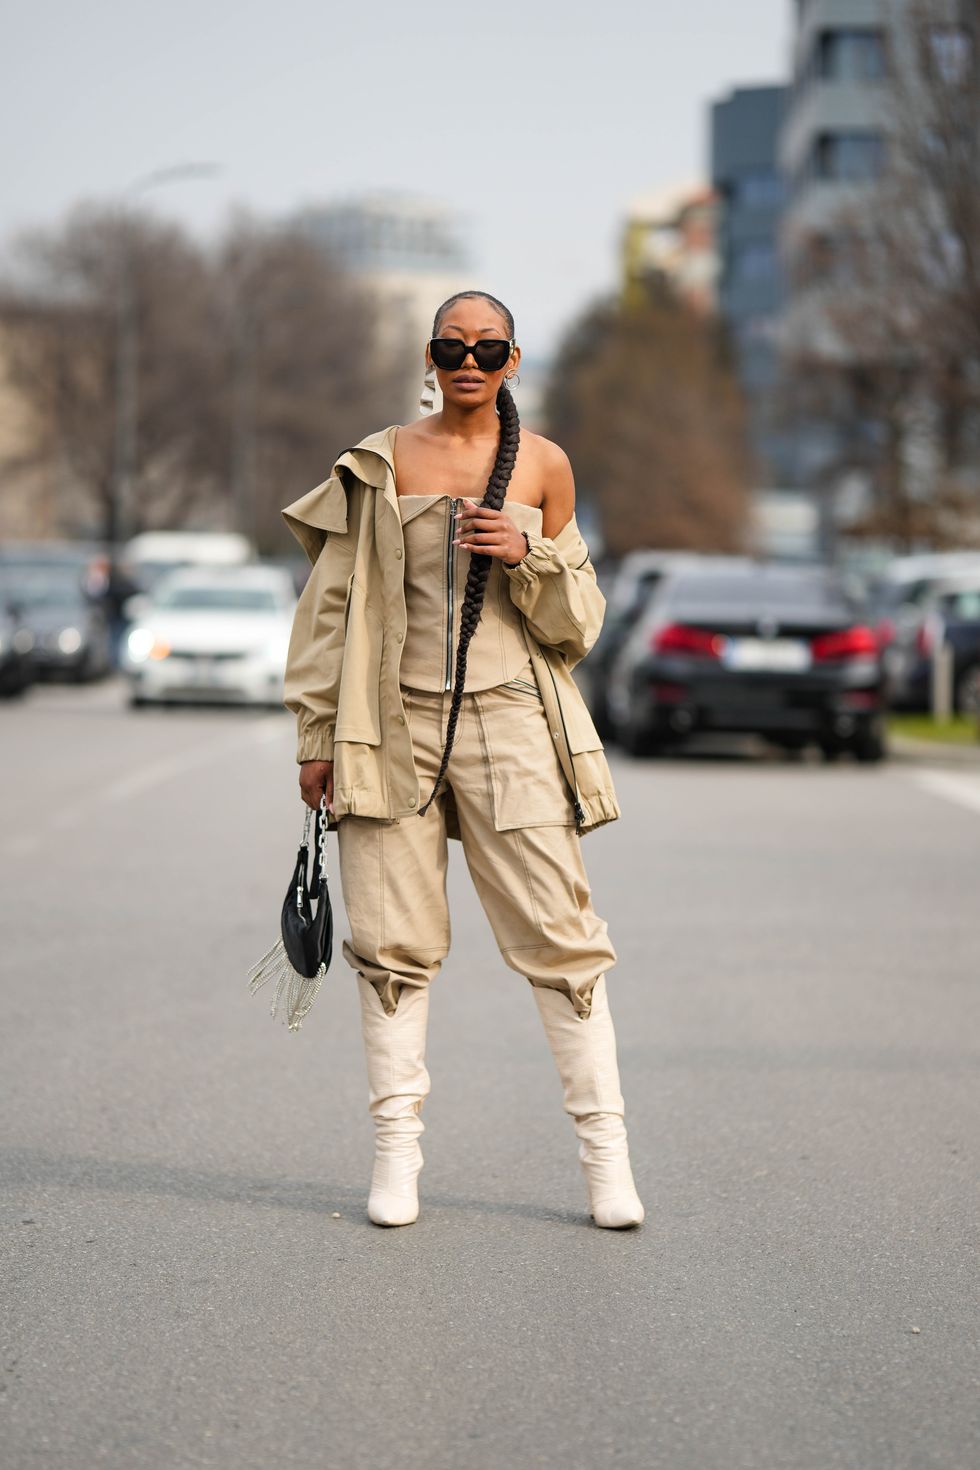 styling baggy cargo pants #mid20sfashion #stylingtips #cargopantsoufit, Styling Baggy Cargo Pants